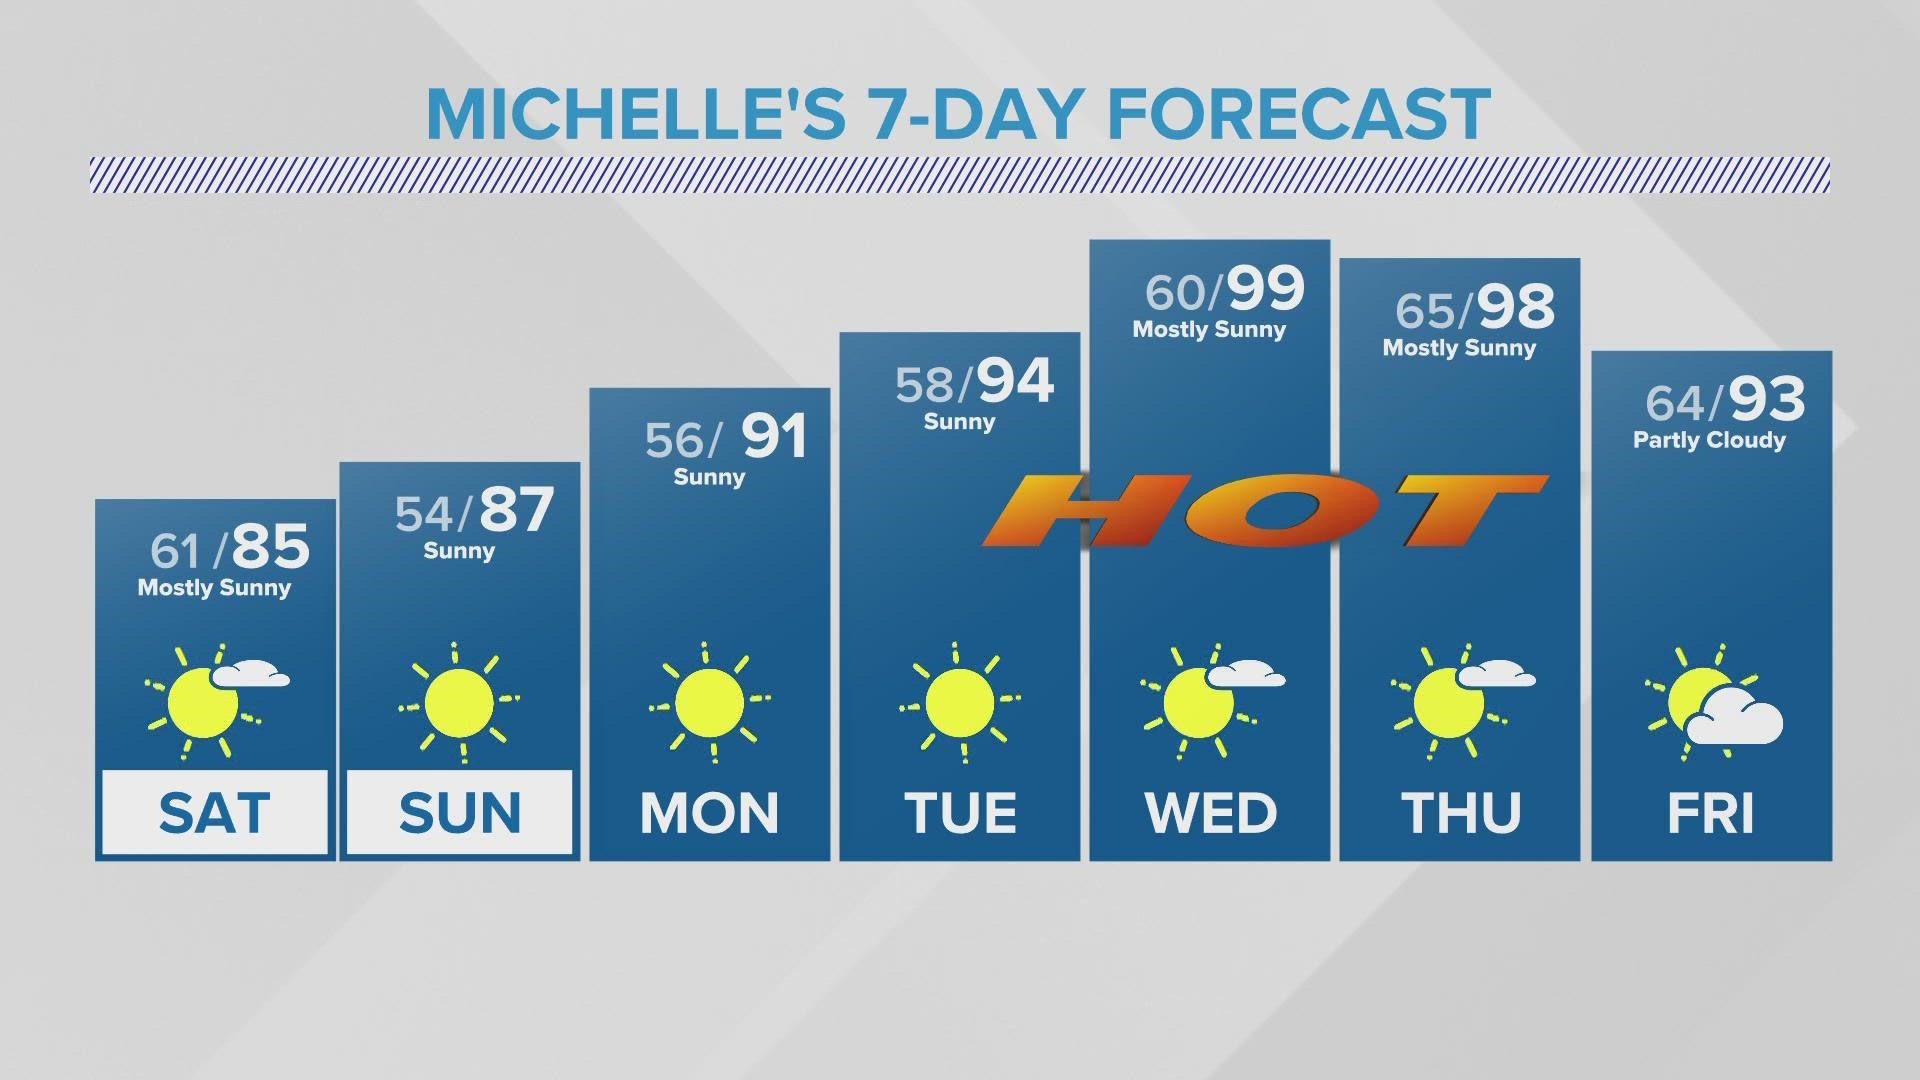 KREM 2 Meteorologist Michelle Boss has the 7-day forecast on Aug. 12, 2022 at 10 p.m.